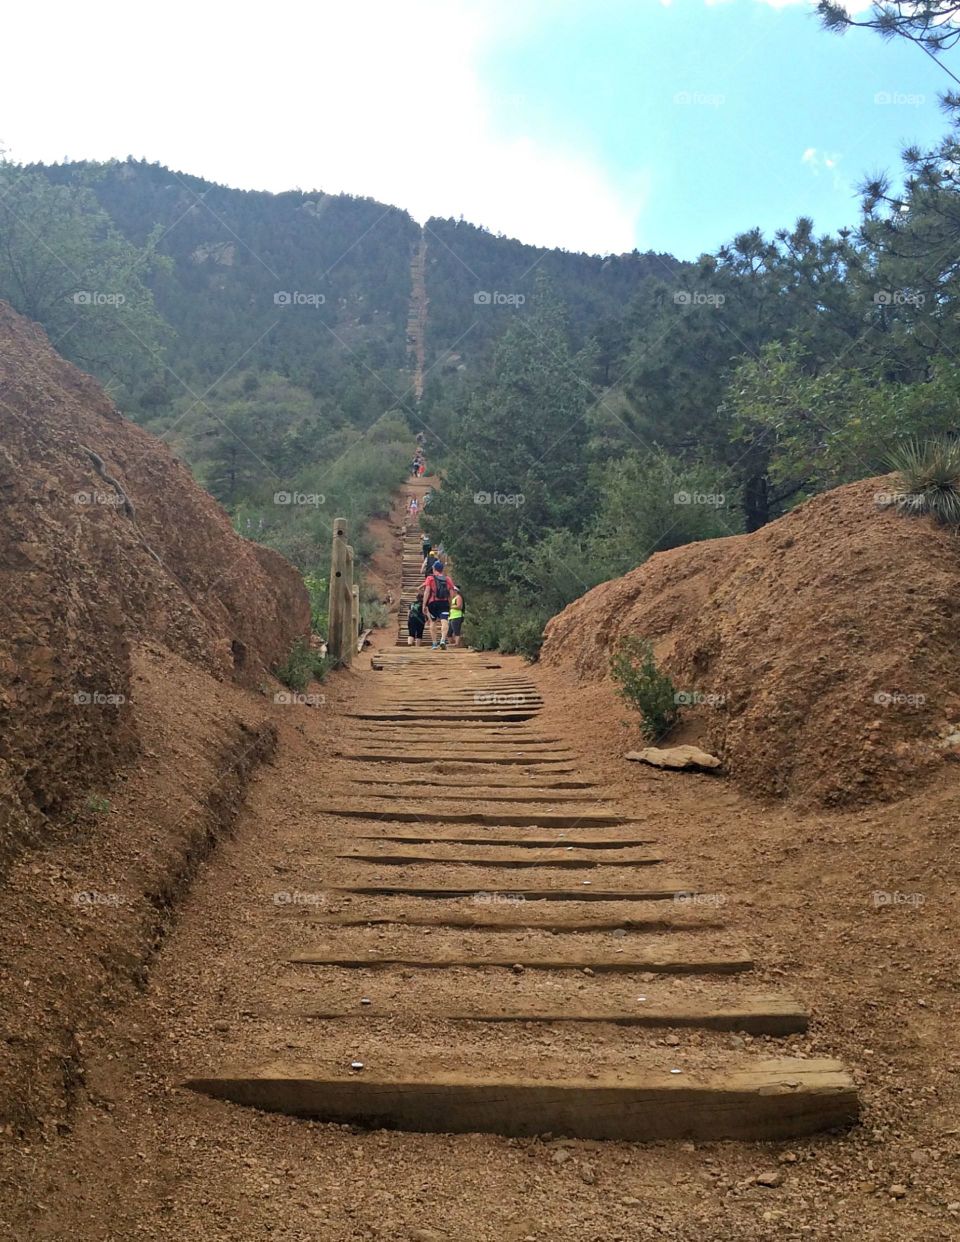 Hiking up, up, up..... The Incline in Manitou Springs, CO. 2000ft incline in 1 mile. It's breathtaking 